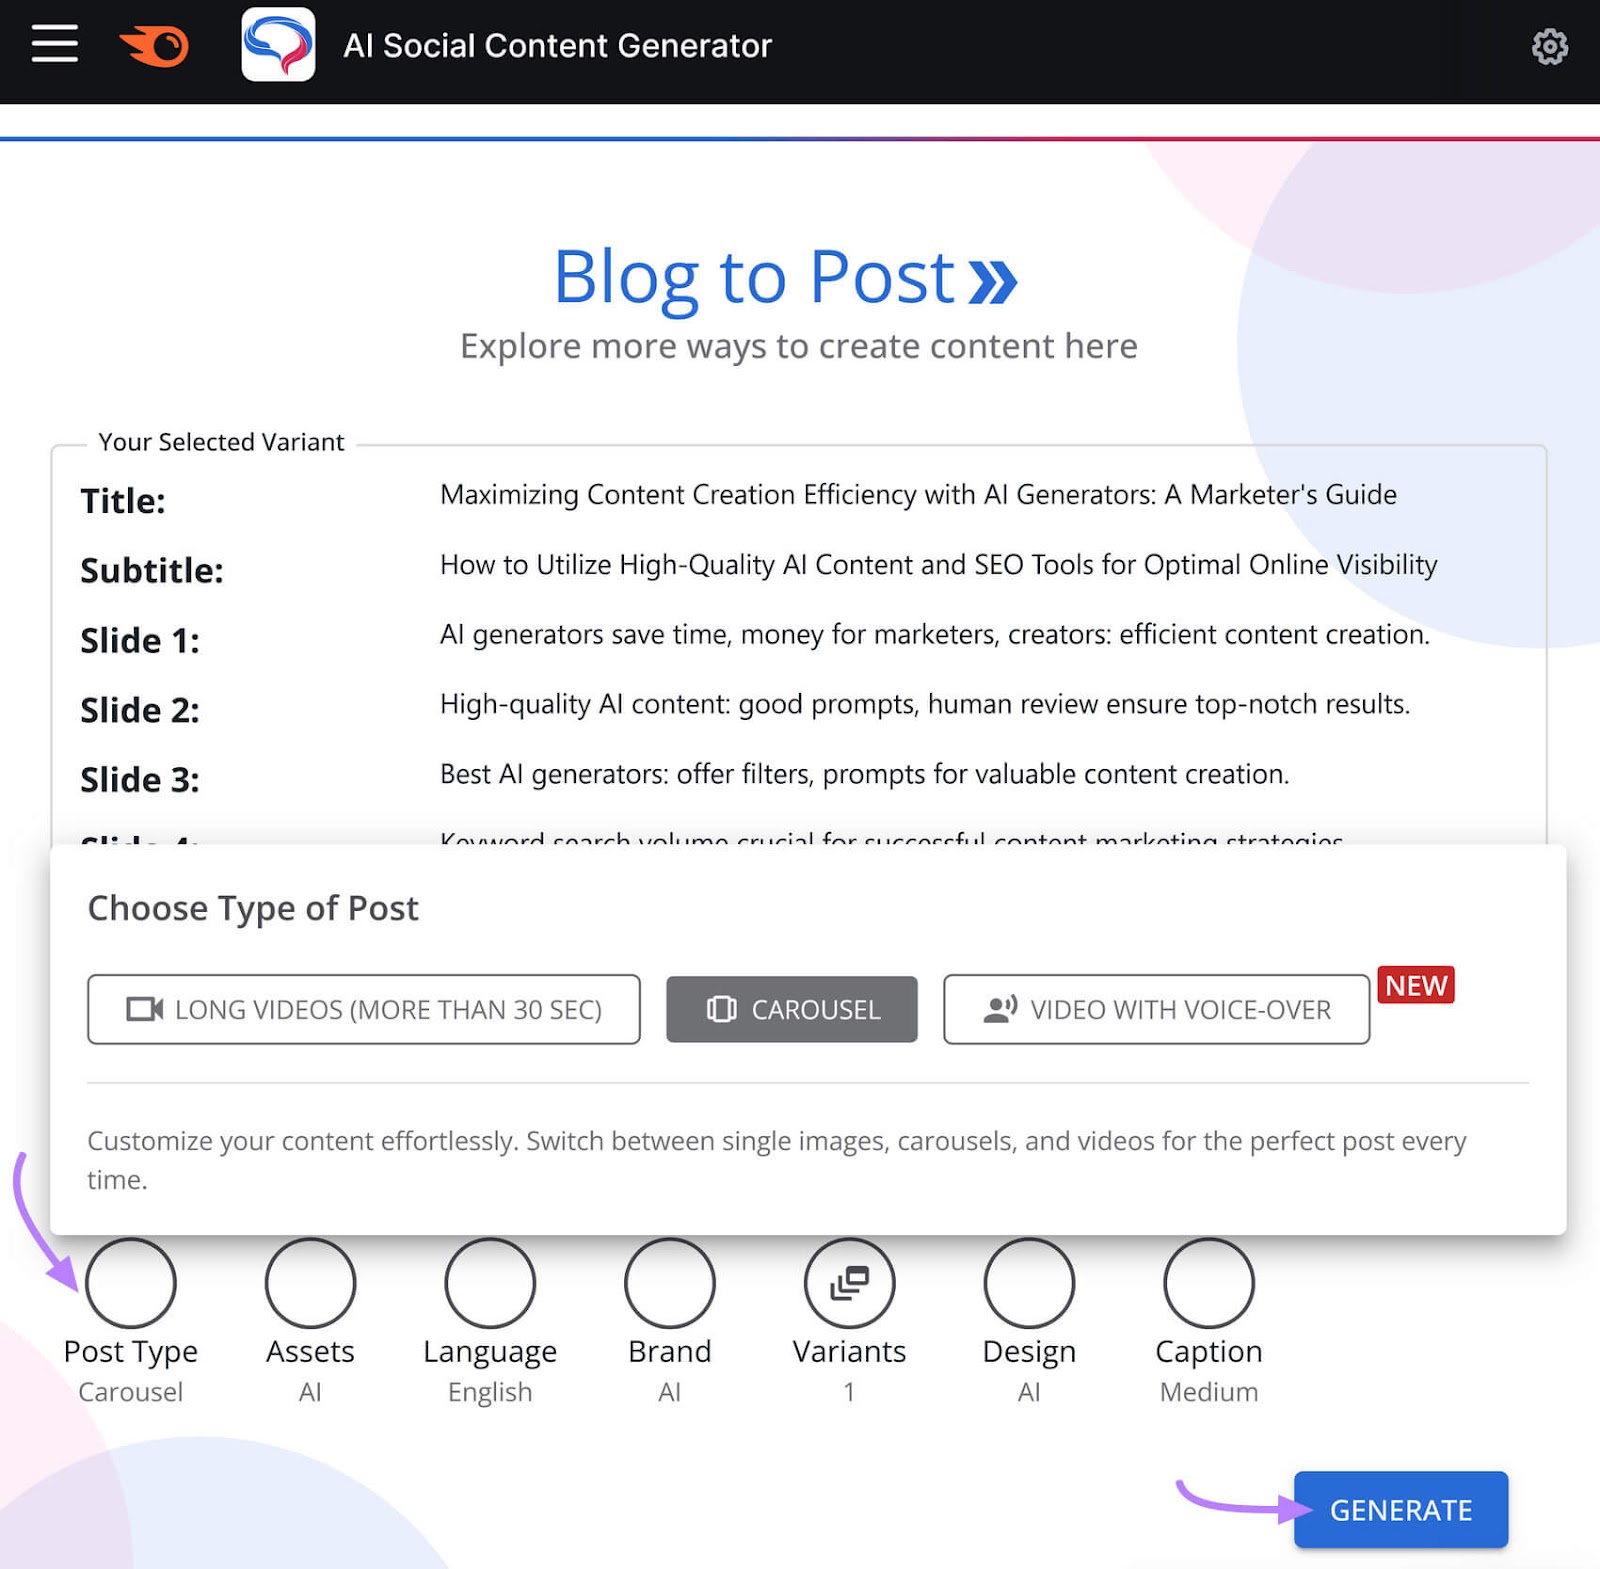 User interface for AI Social Content Generator, showing options for creating a blog post with selectable post types.